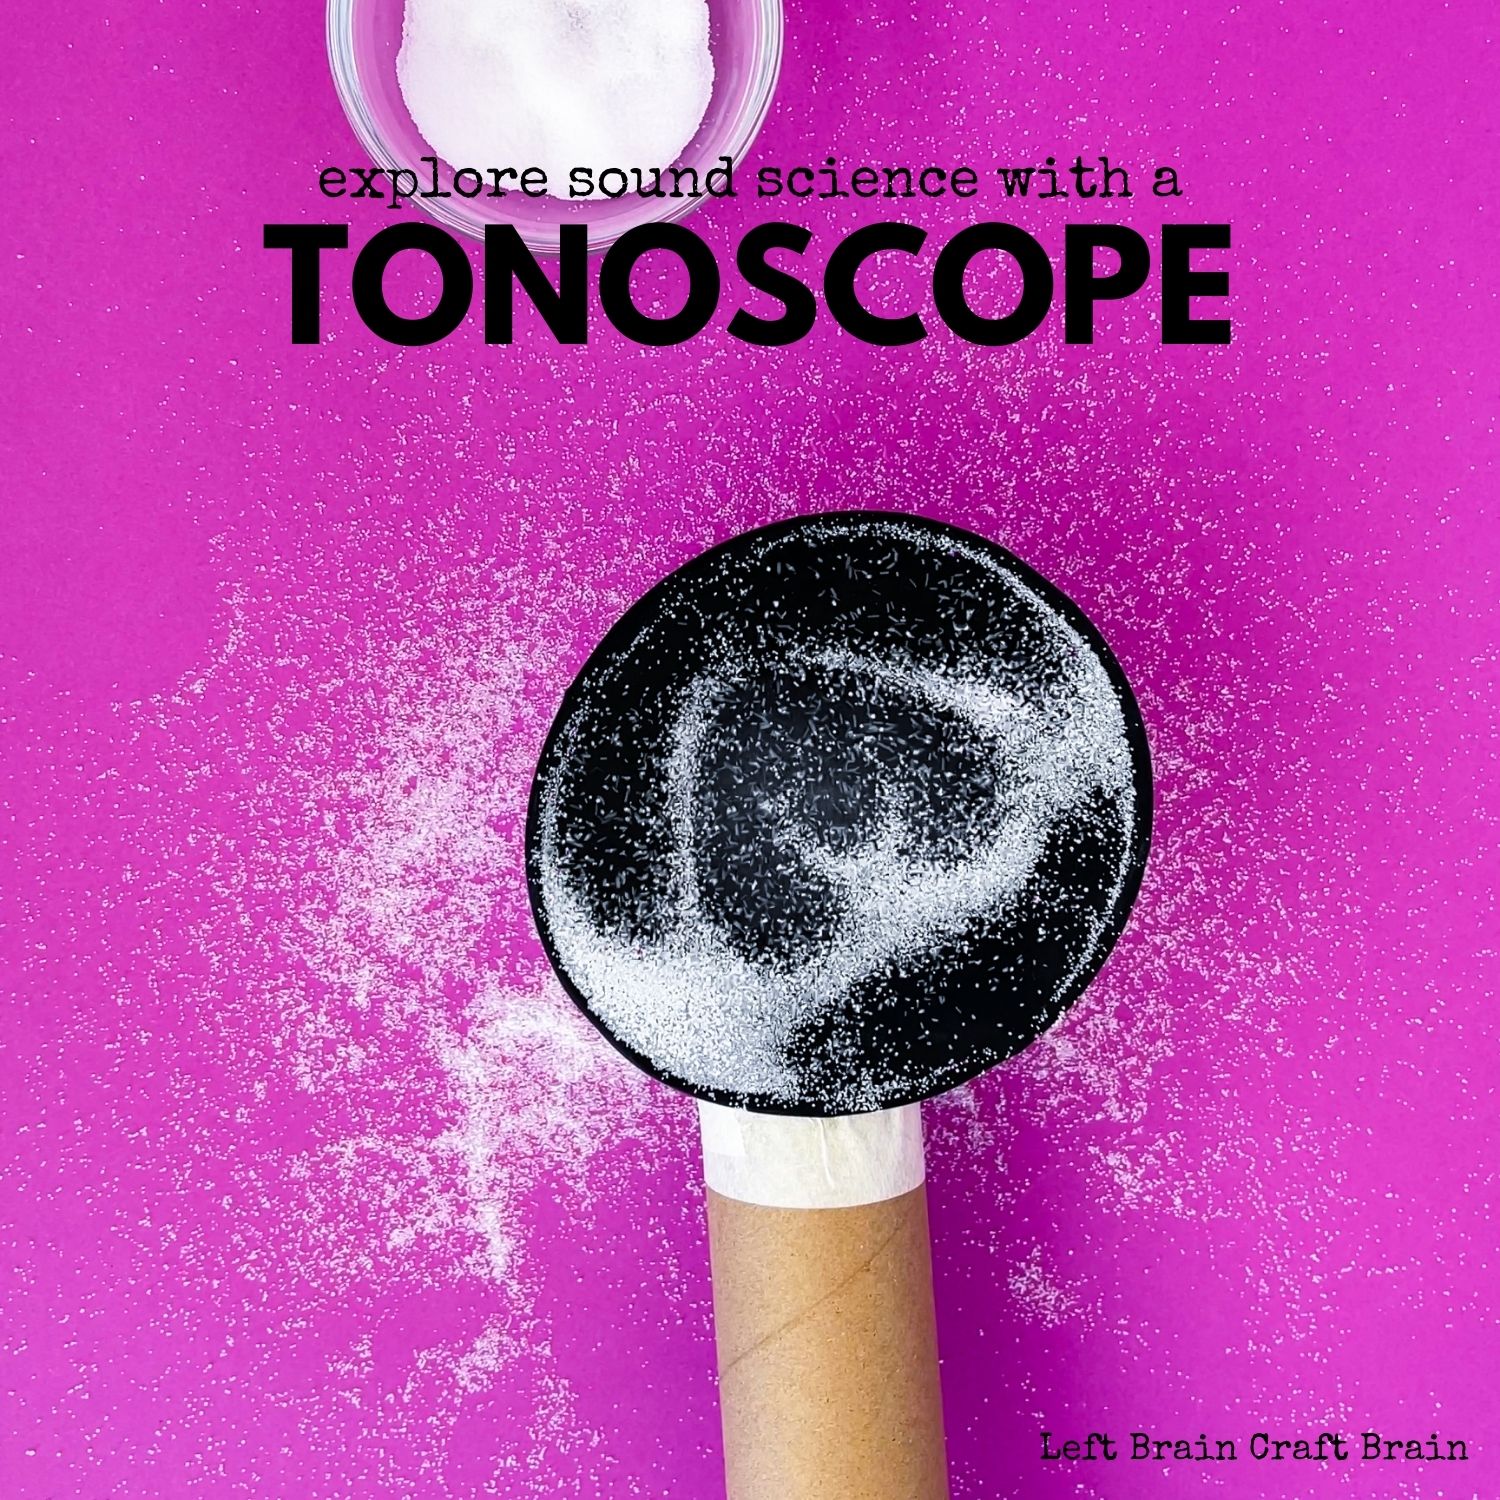 Explore sound science with a tonoscope, a device that helps you see sound vibrations. It's a super fun sound science experiment for kids. Purple background with paper towel roll that ends in a black circle covered with salt plus a small glass bowl of salt. Titles explore sound science with a tonoscope.